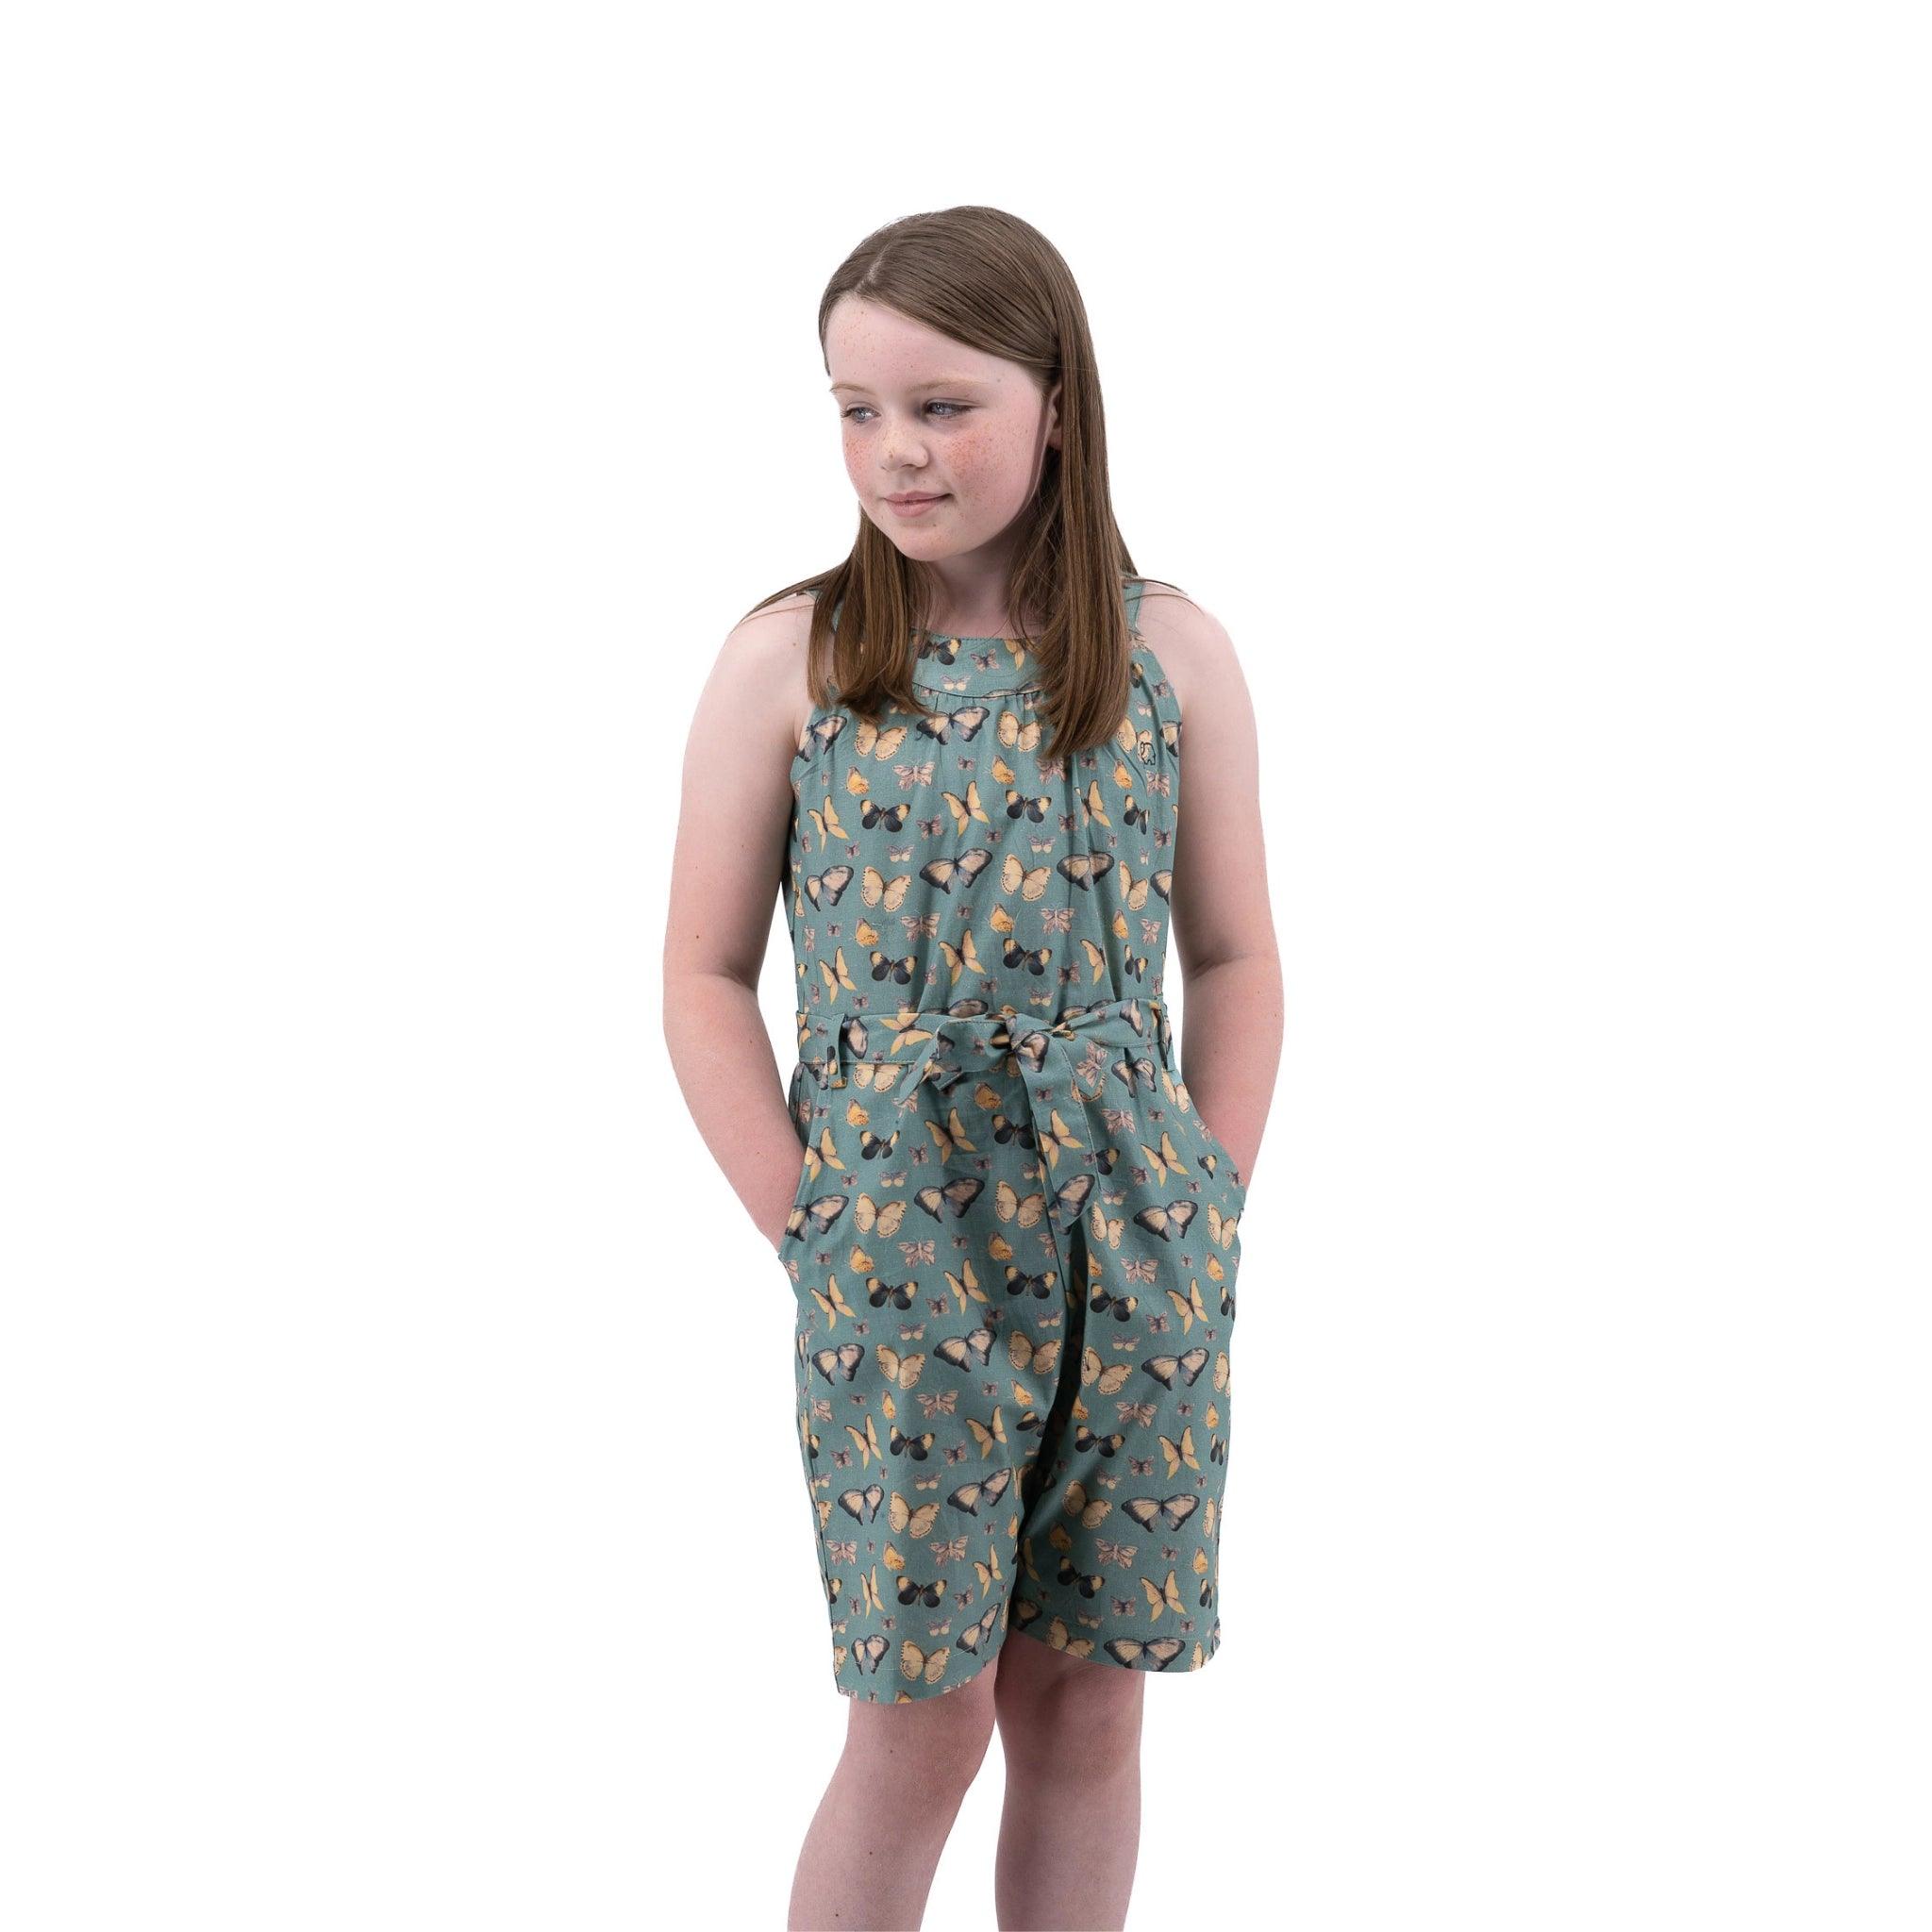 Young girl in a Karee Blue Surf Adventure-ready Cotton Play Suit standing against a white background, looking to her left with a thoughtful expression.